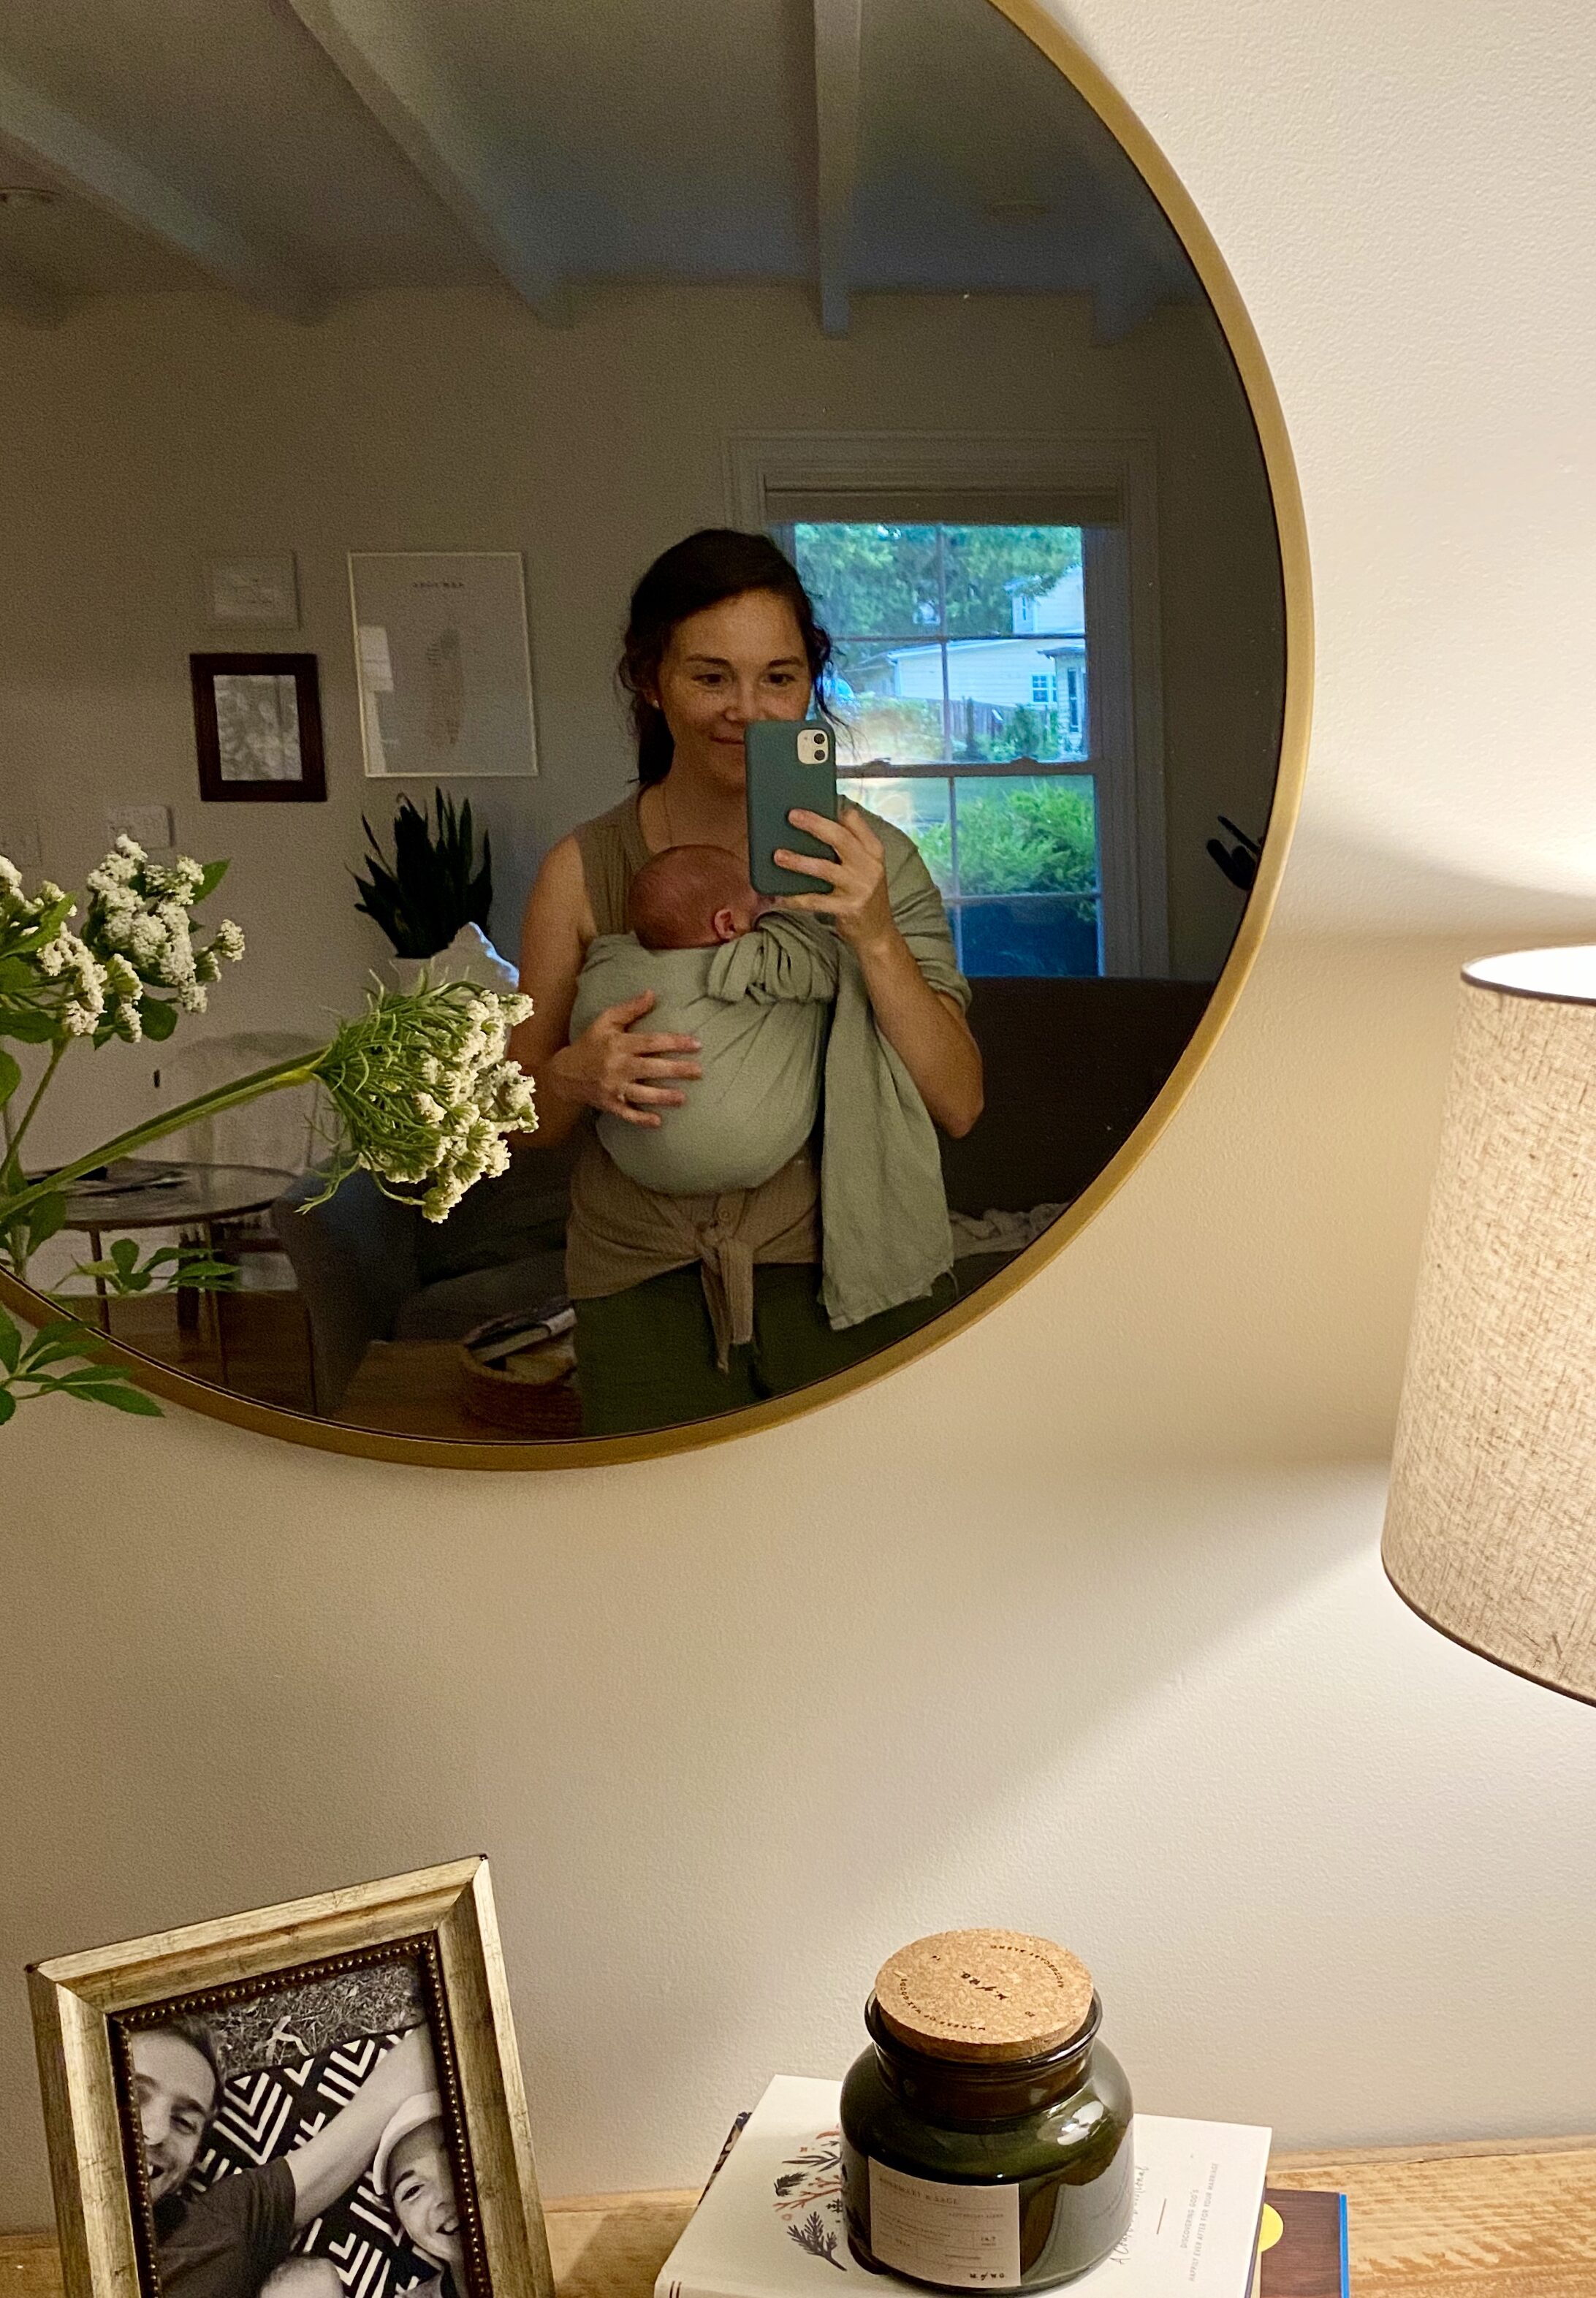 The Real Deal on the Fourth Trimester – Matrescence